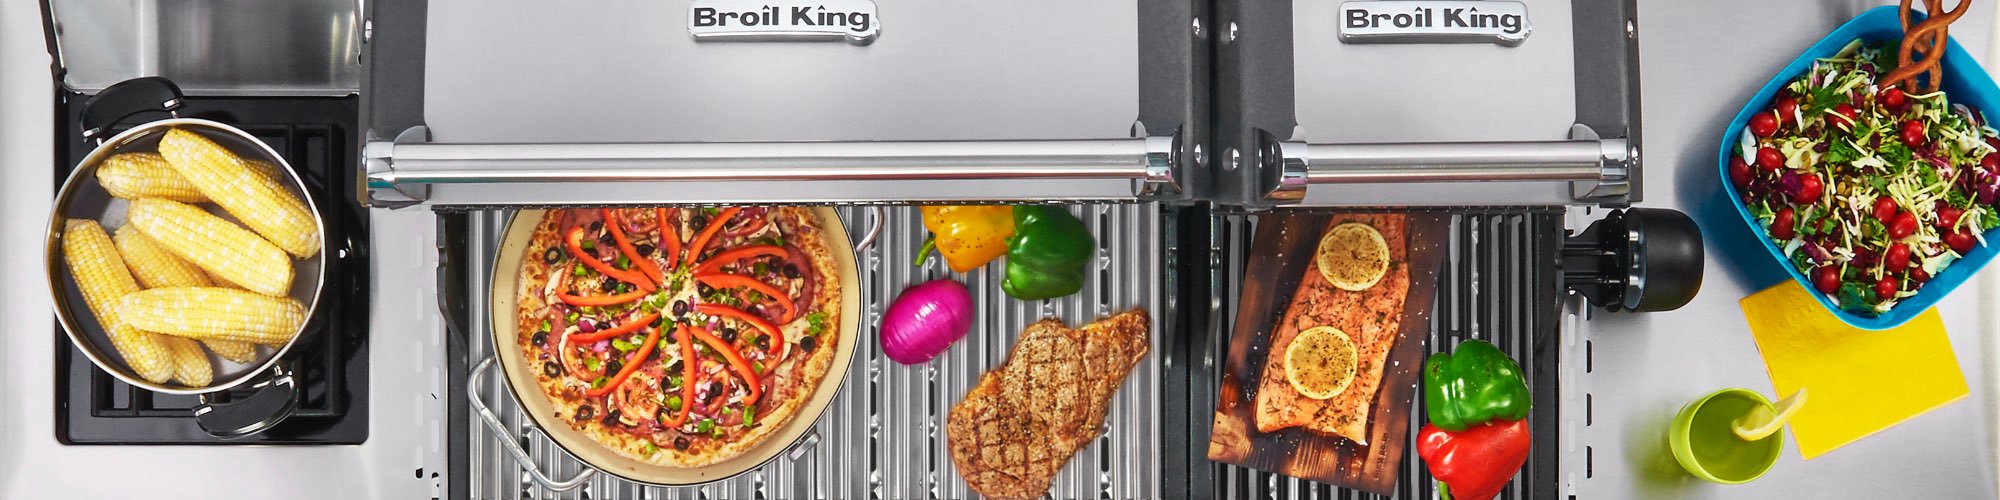 Broil King PWR